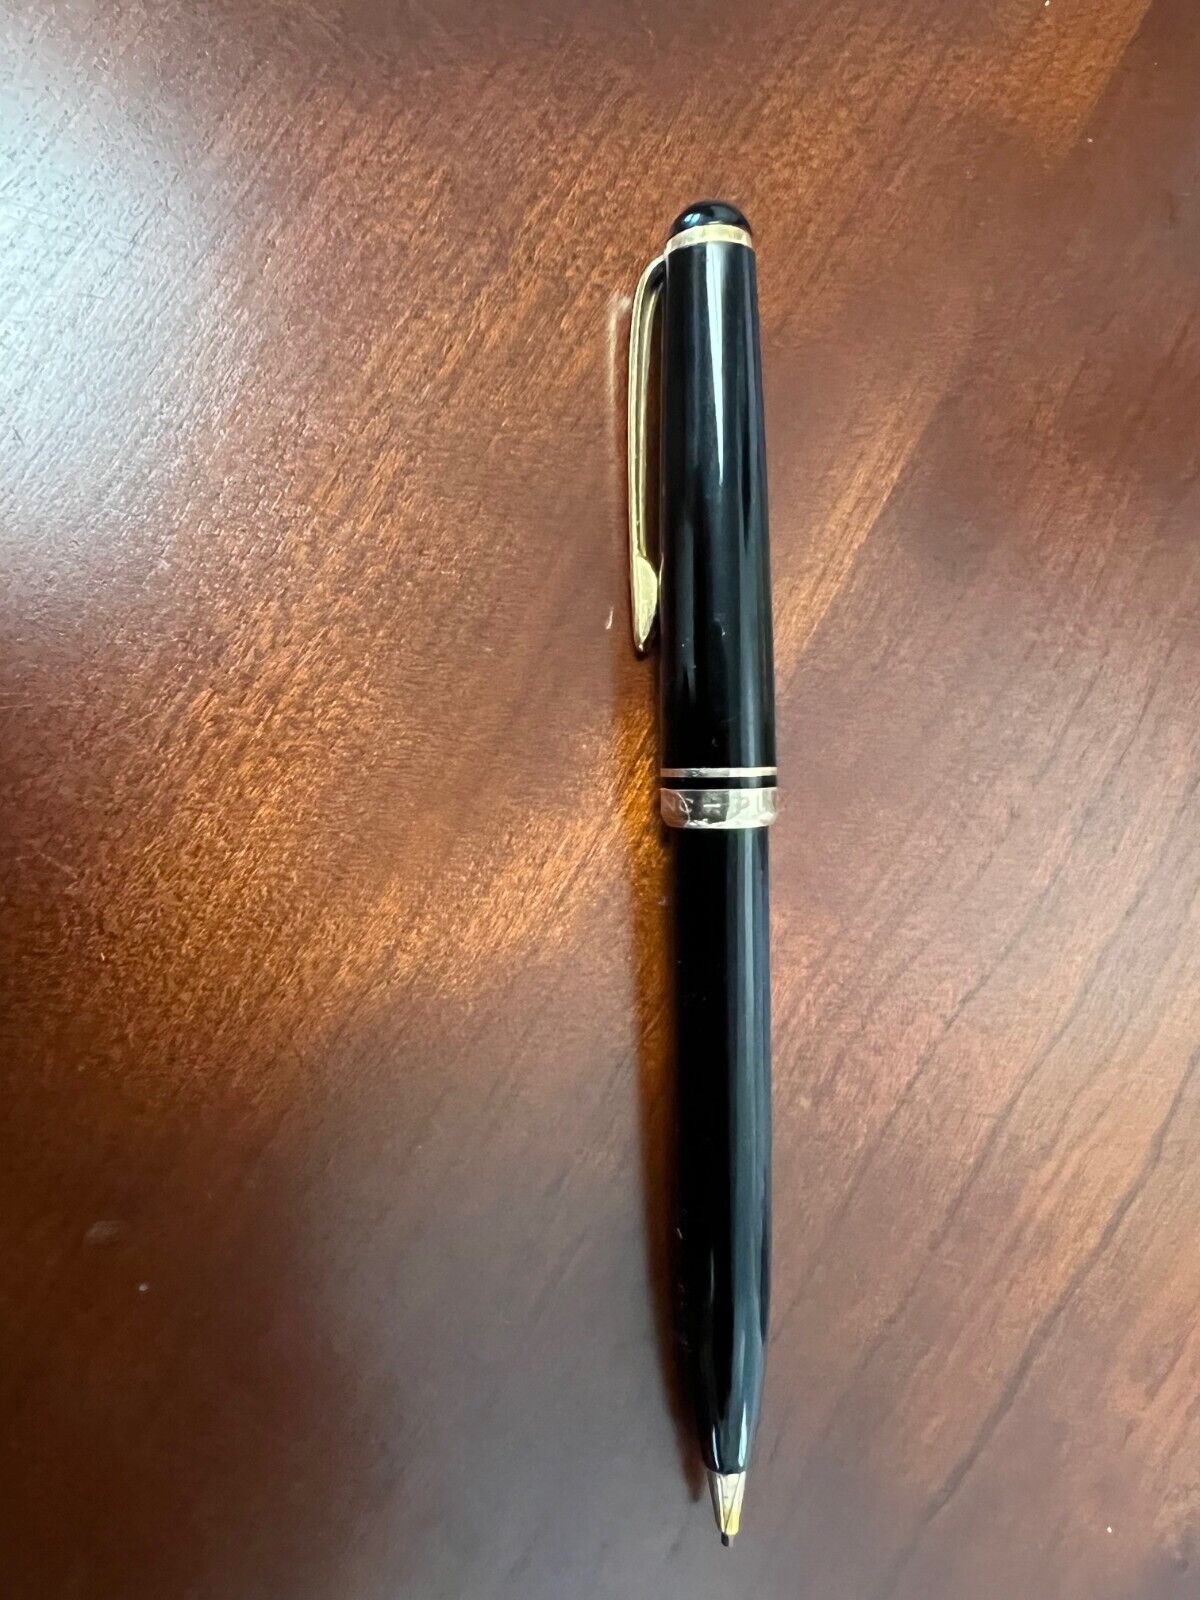 Montblanc 276 pencil from the 1950s